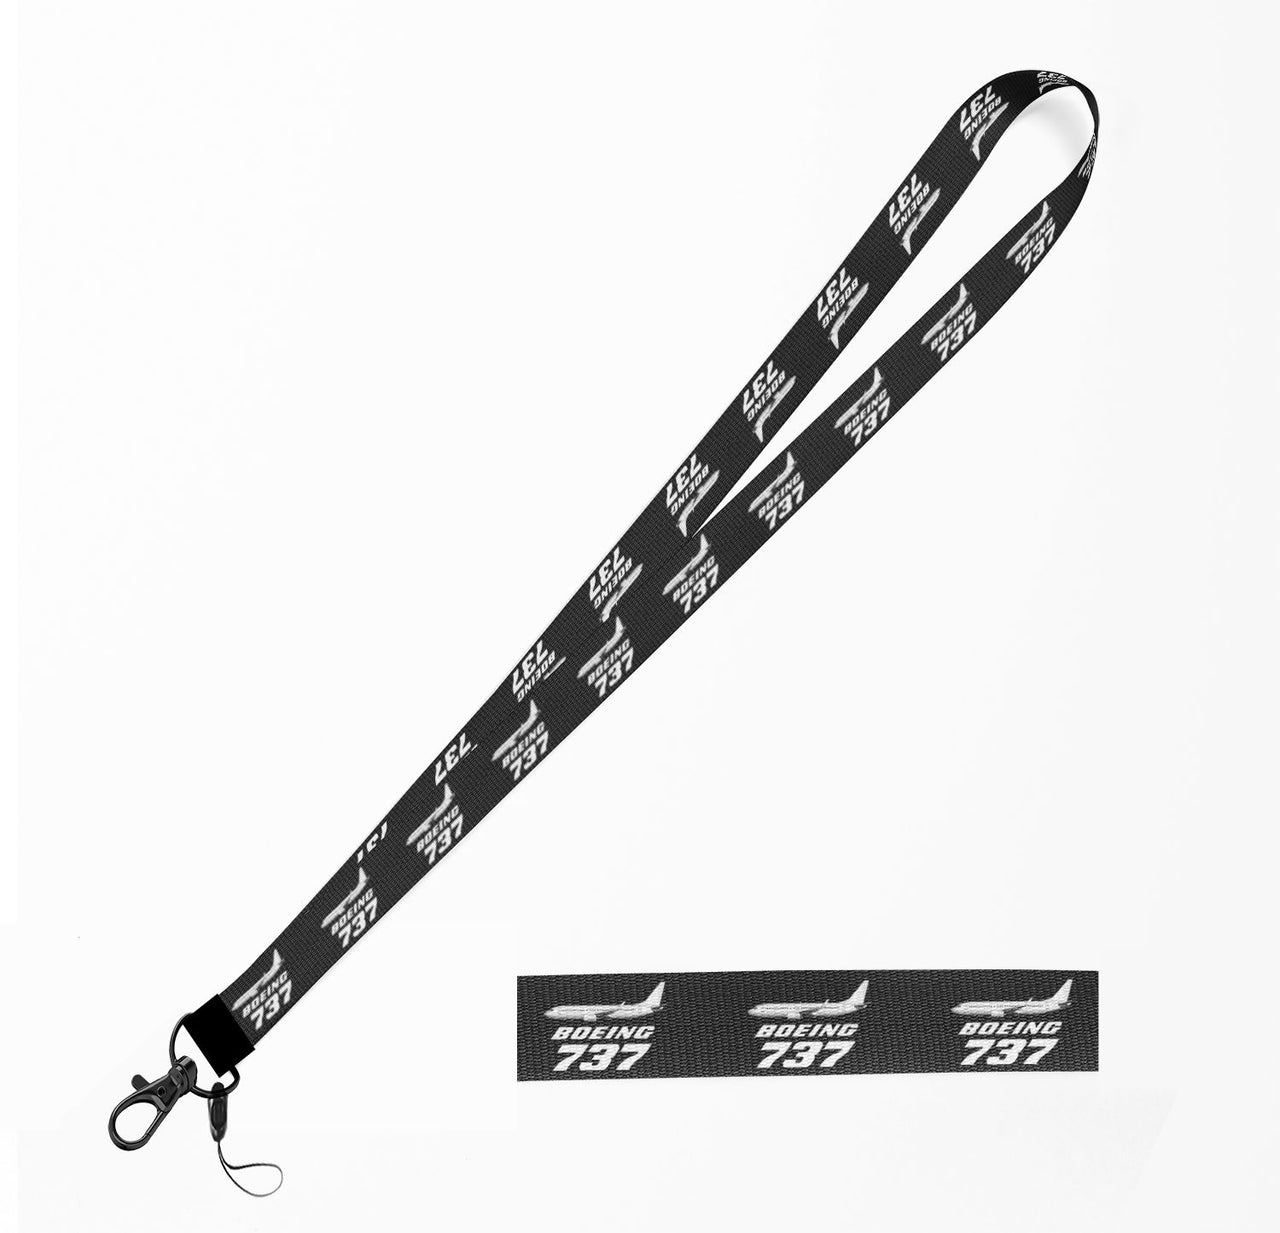 The Boeing 737 Designed Lanyard & ID Holders